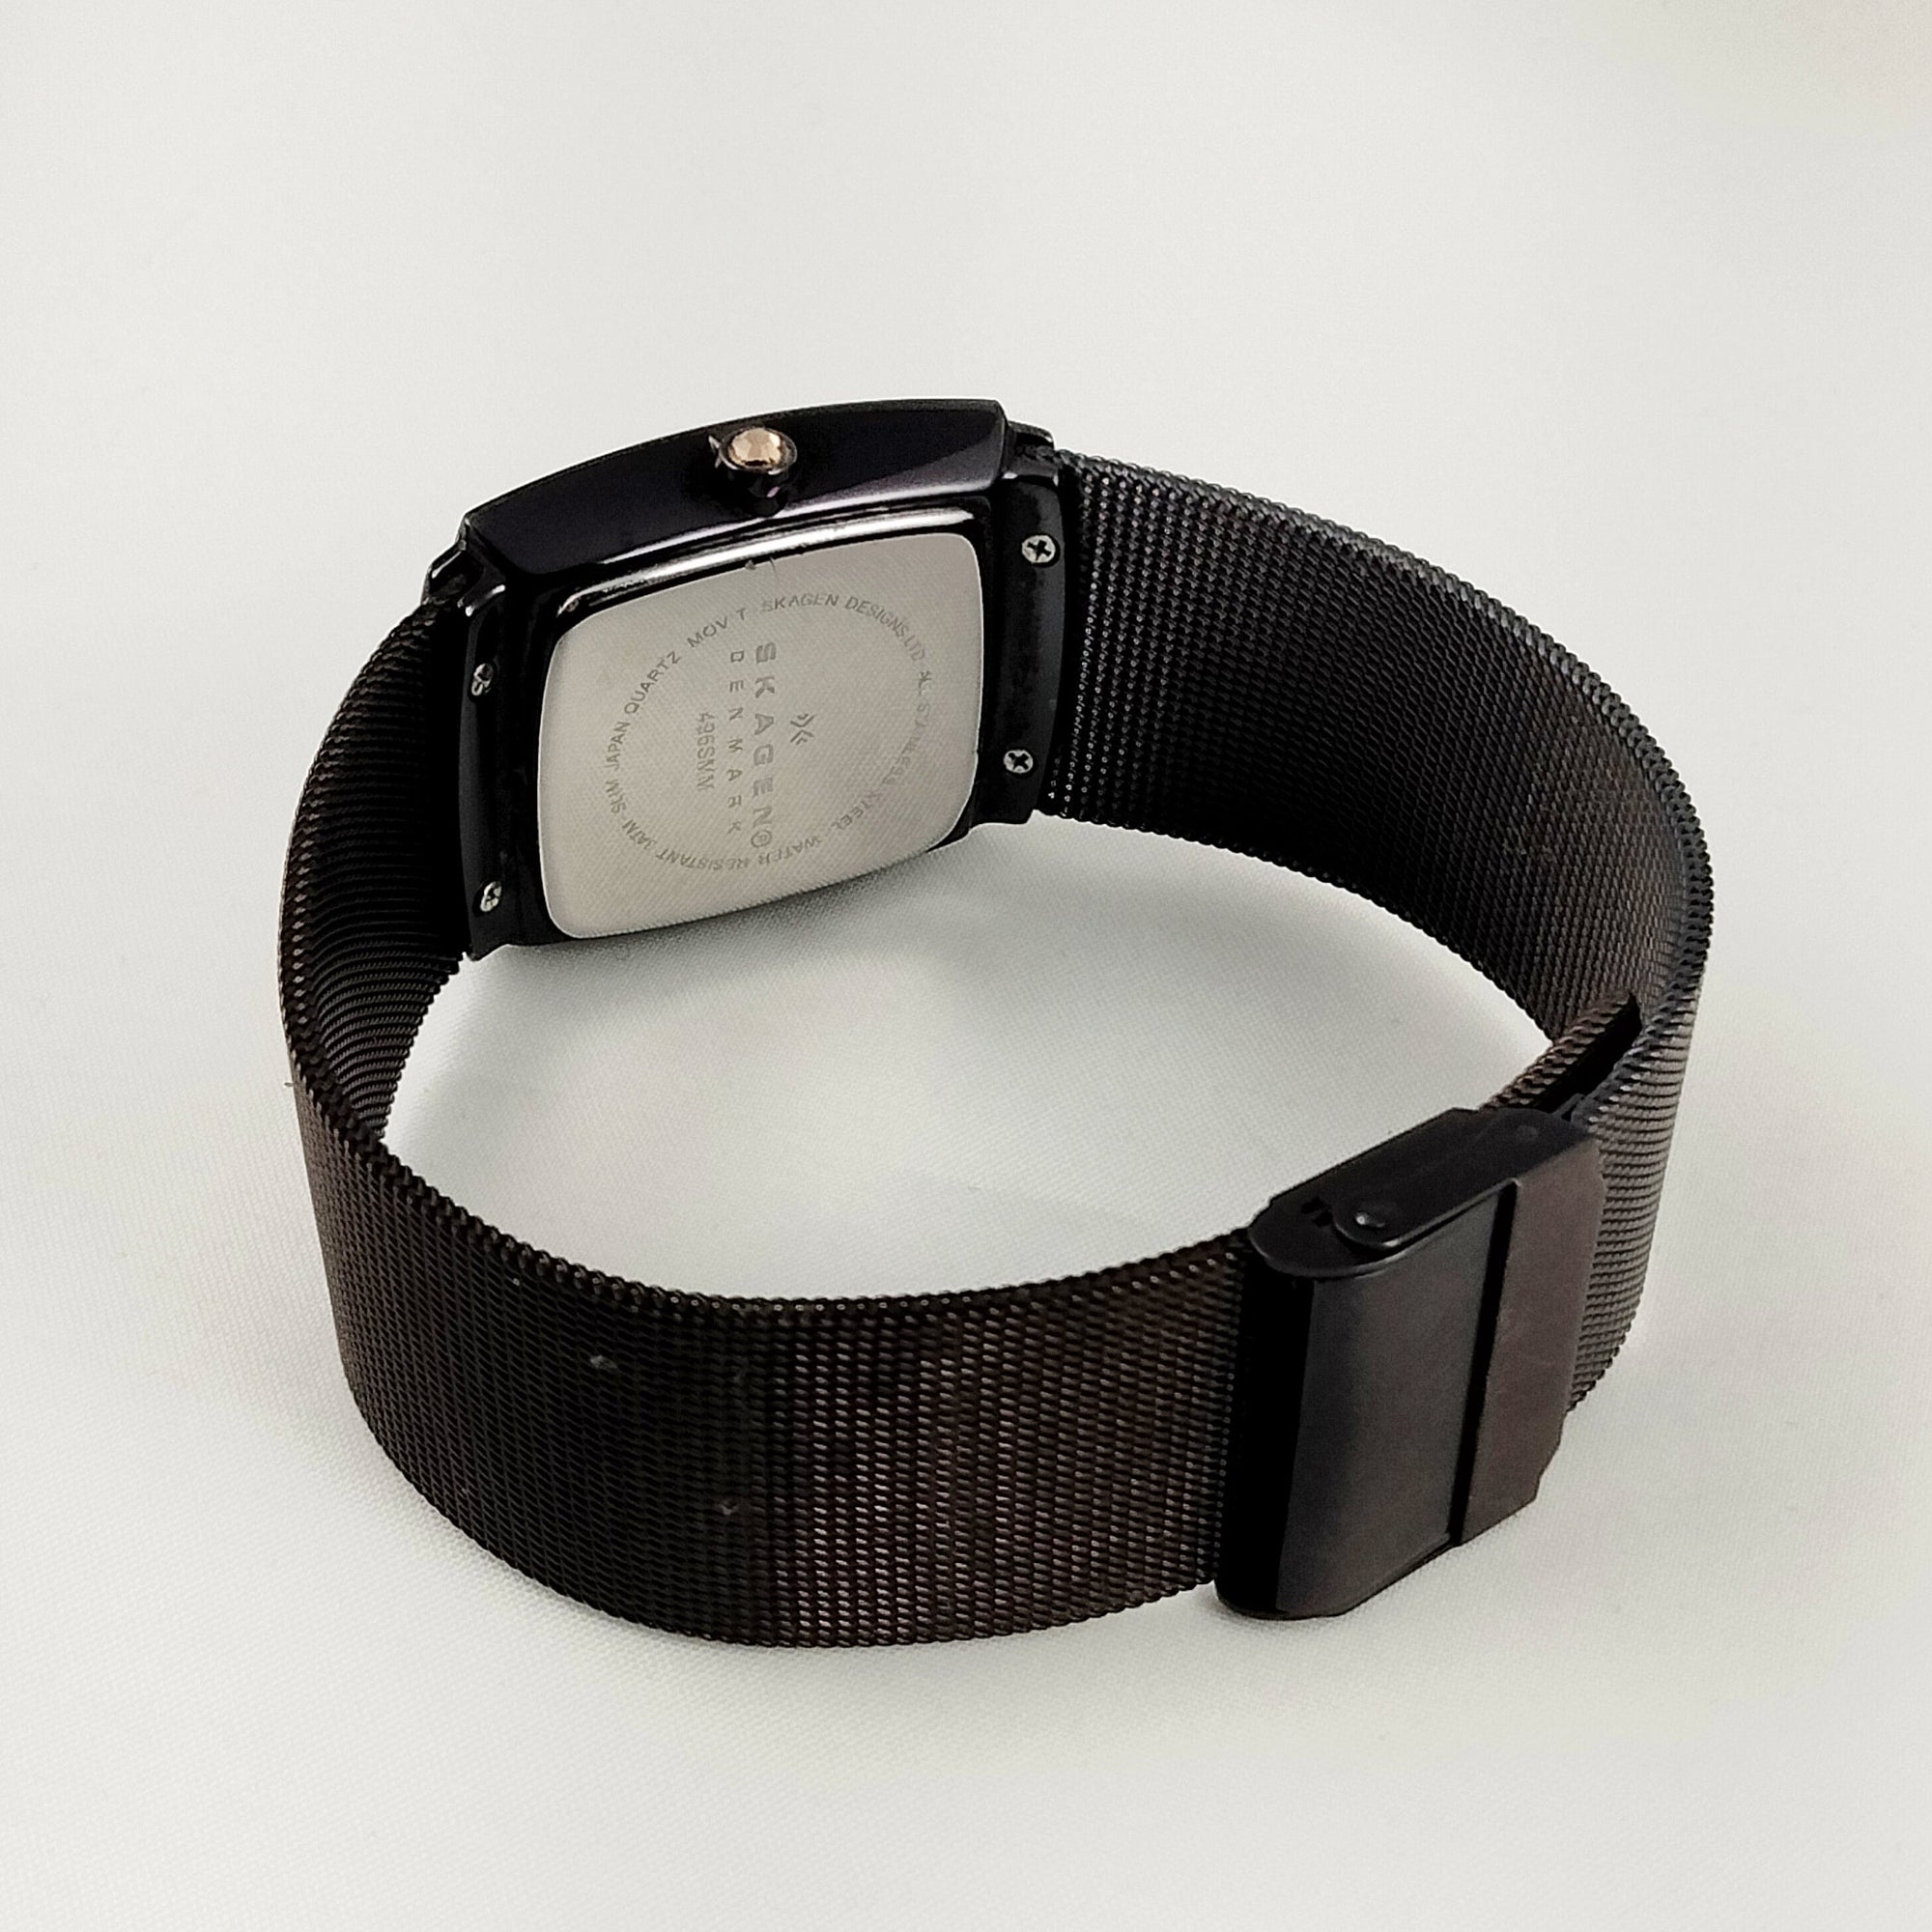 I Like Mikes Mid Century Modern Watches Skagen Unisex Stainless Steel Dark Brown Chronograph Watch, Gold Tone and Jewel Details, Mesh Strap